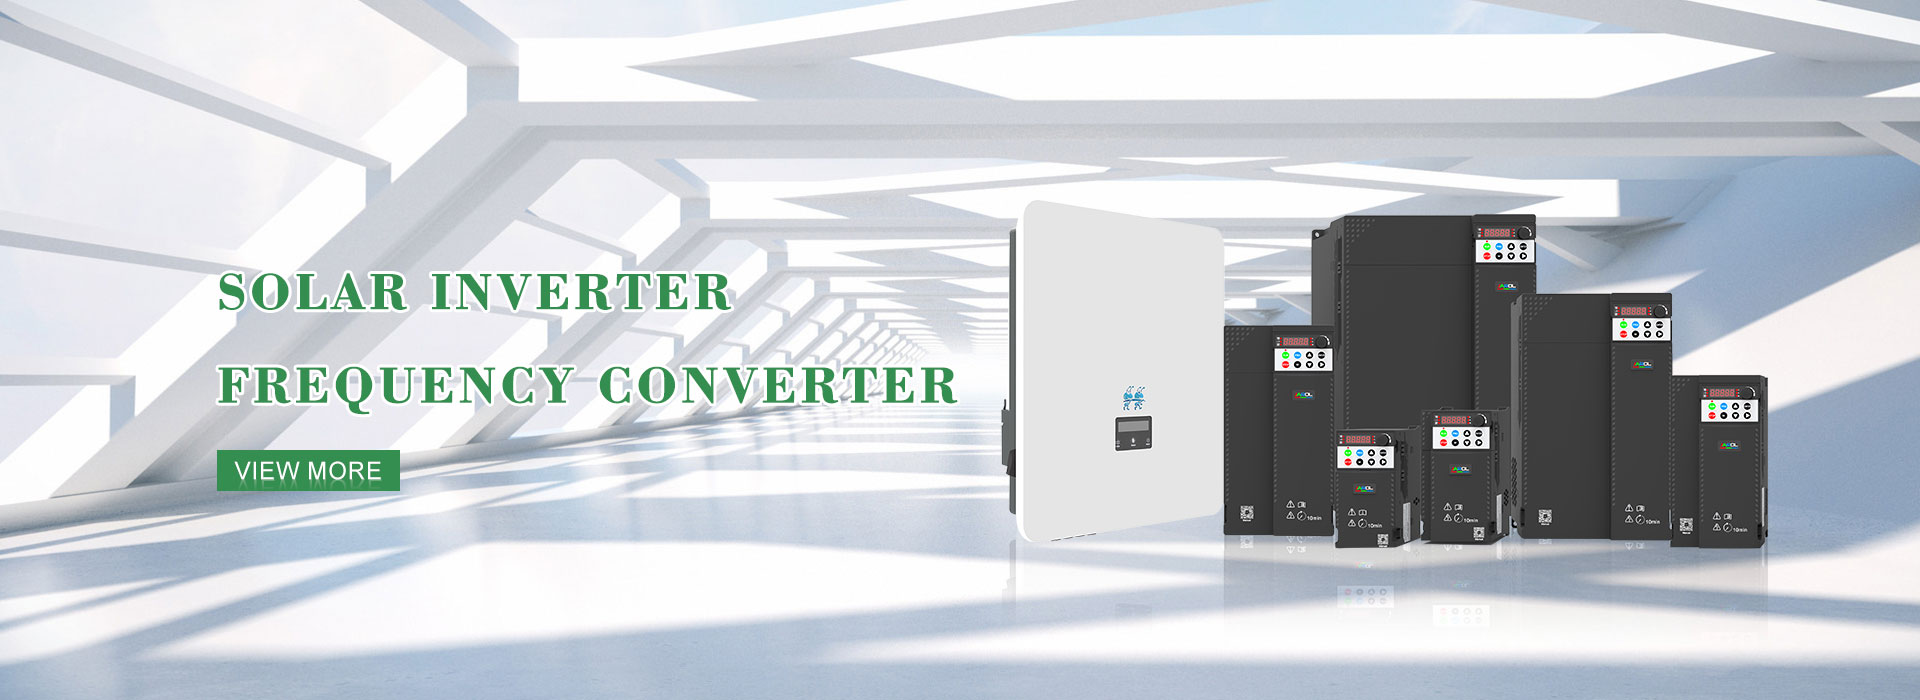 Hot Sale Advanced Solar Inverter made in China